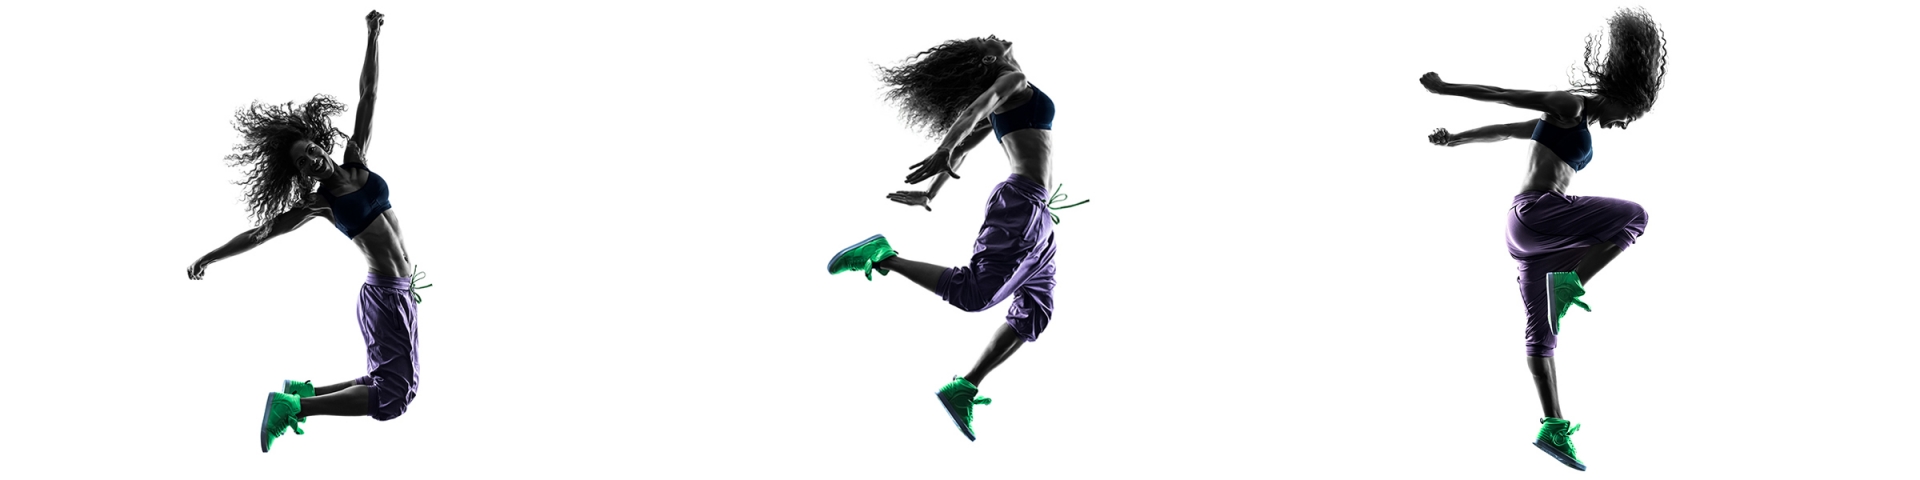 Three images of a woman jumping